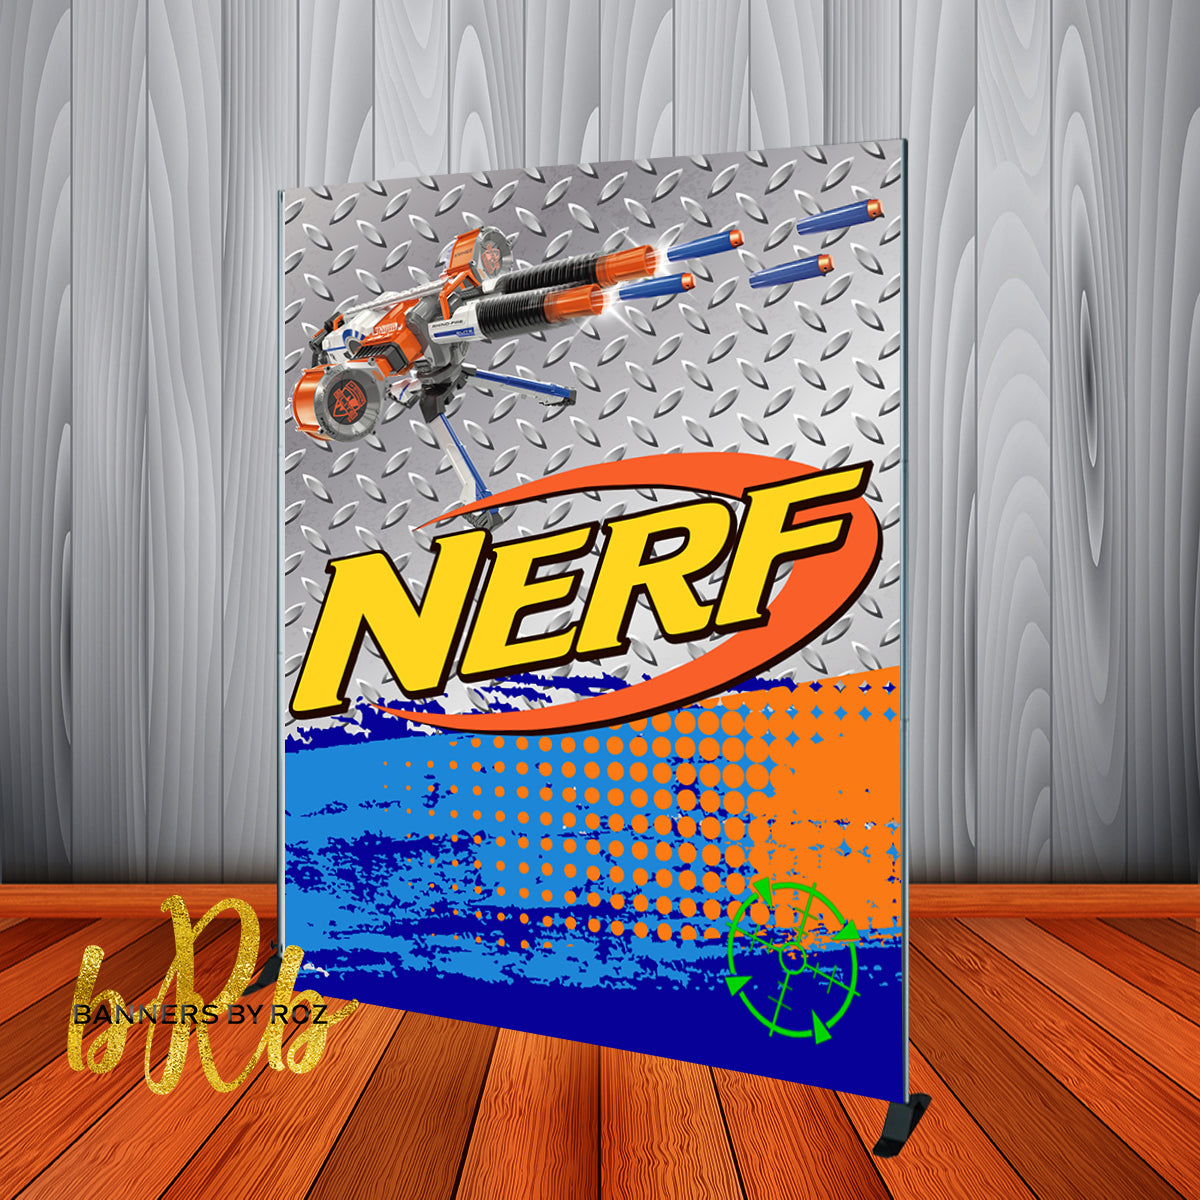 Nerf Birthday Backdrop Personalized Step & Repeat - Designed, Printed ...